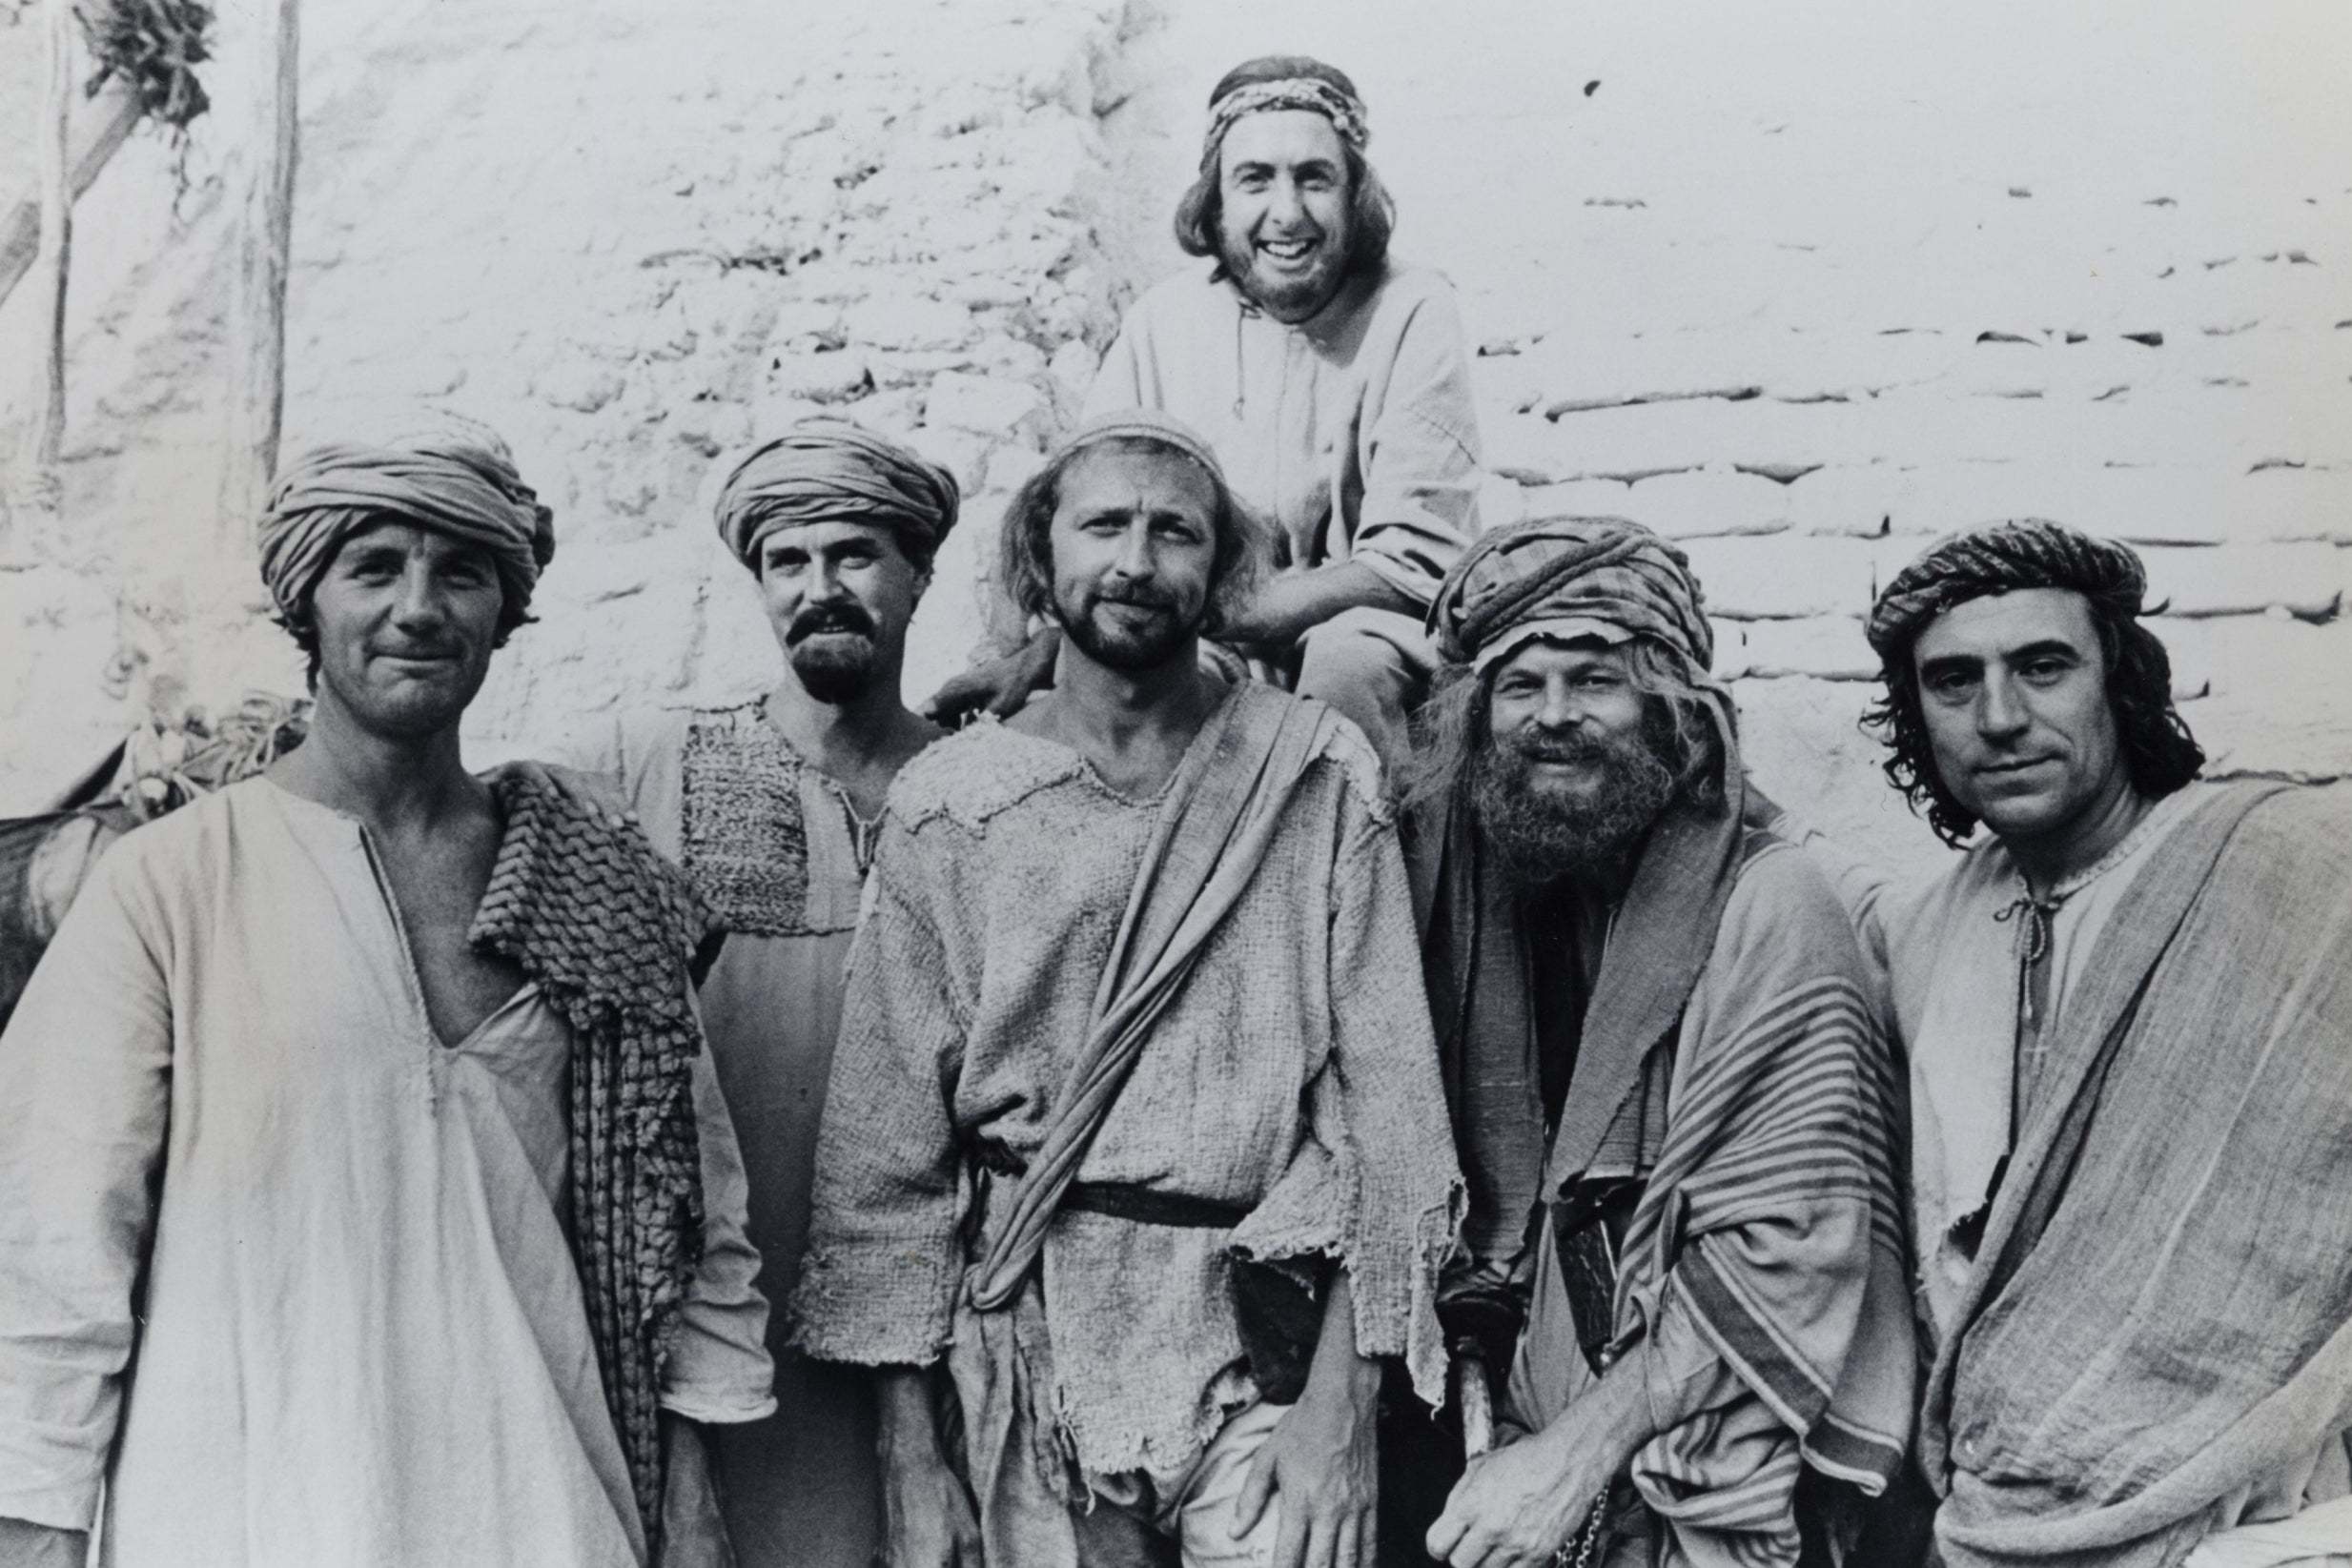 Jones (far right) with his Python colleagues on the set of ‘Life of Brian’